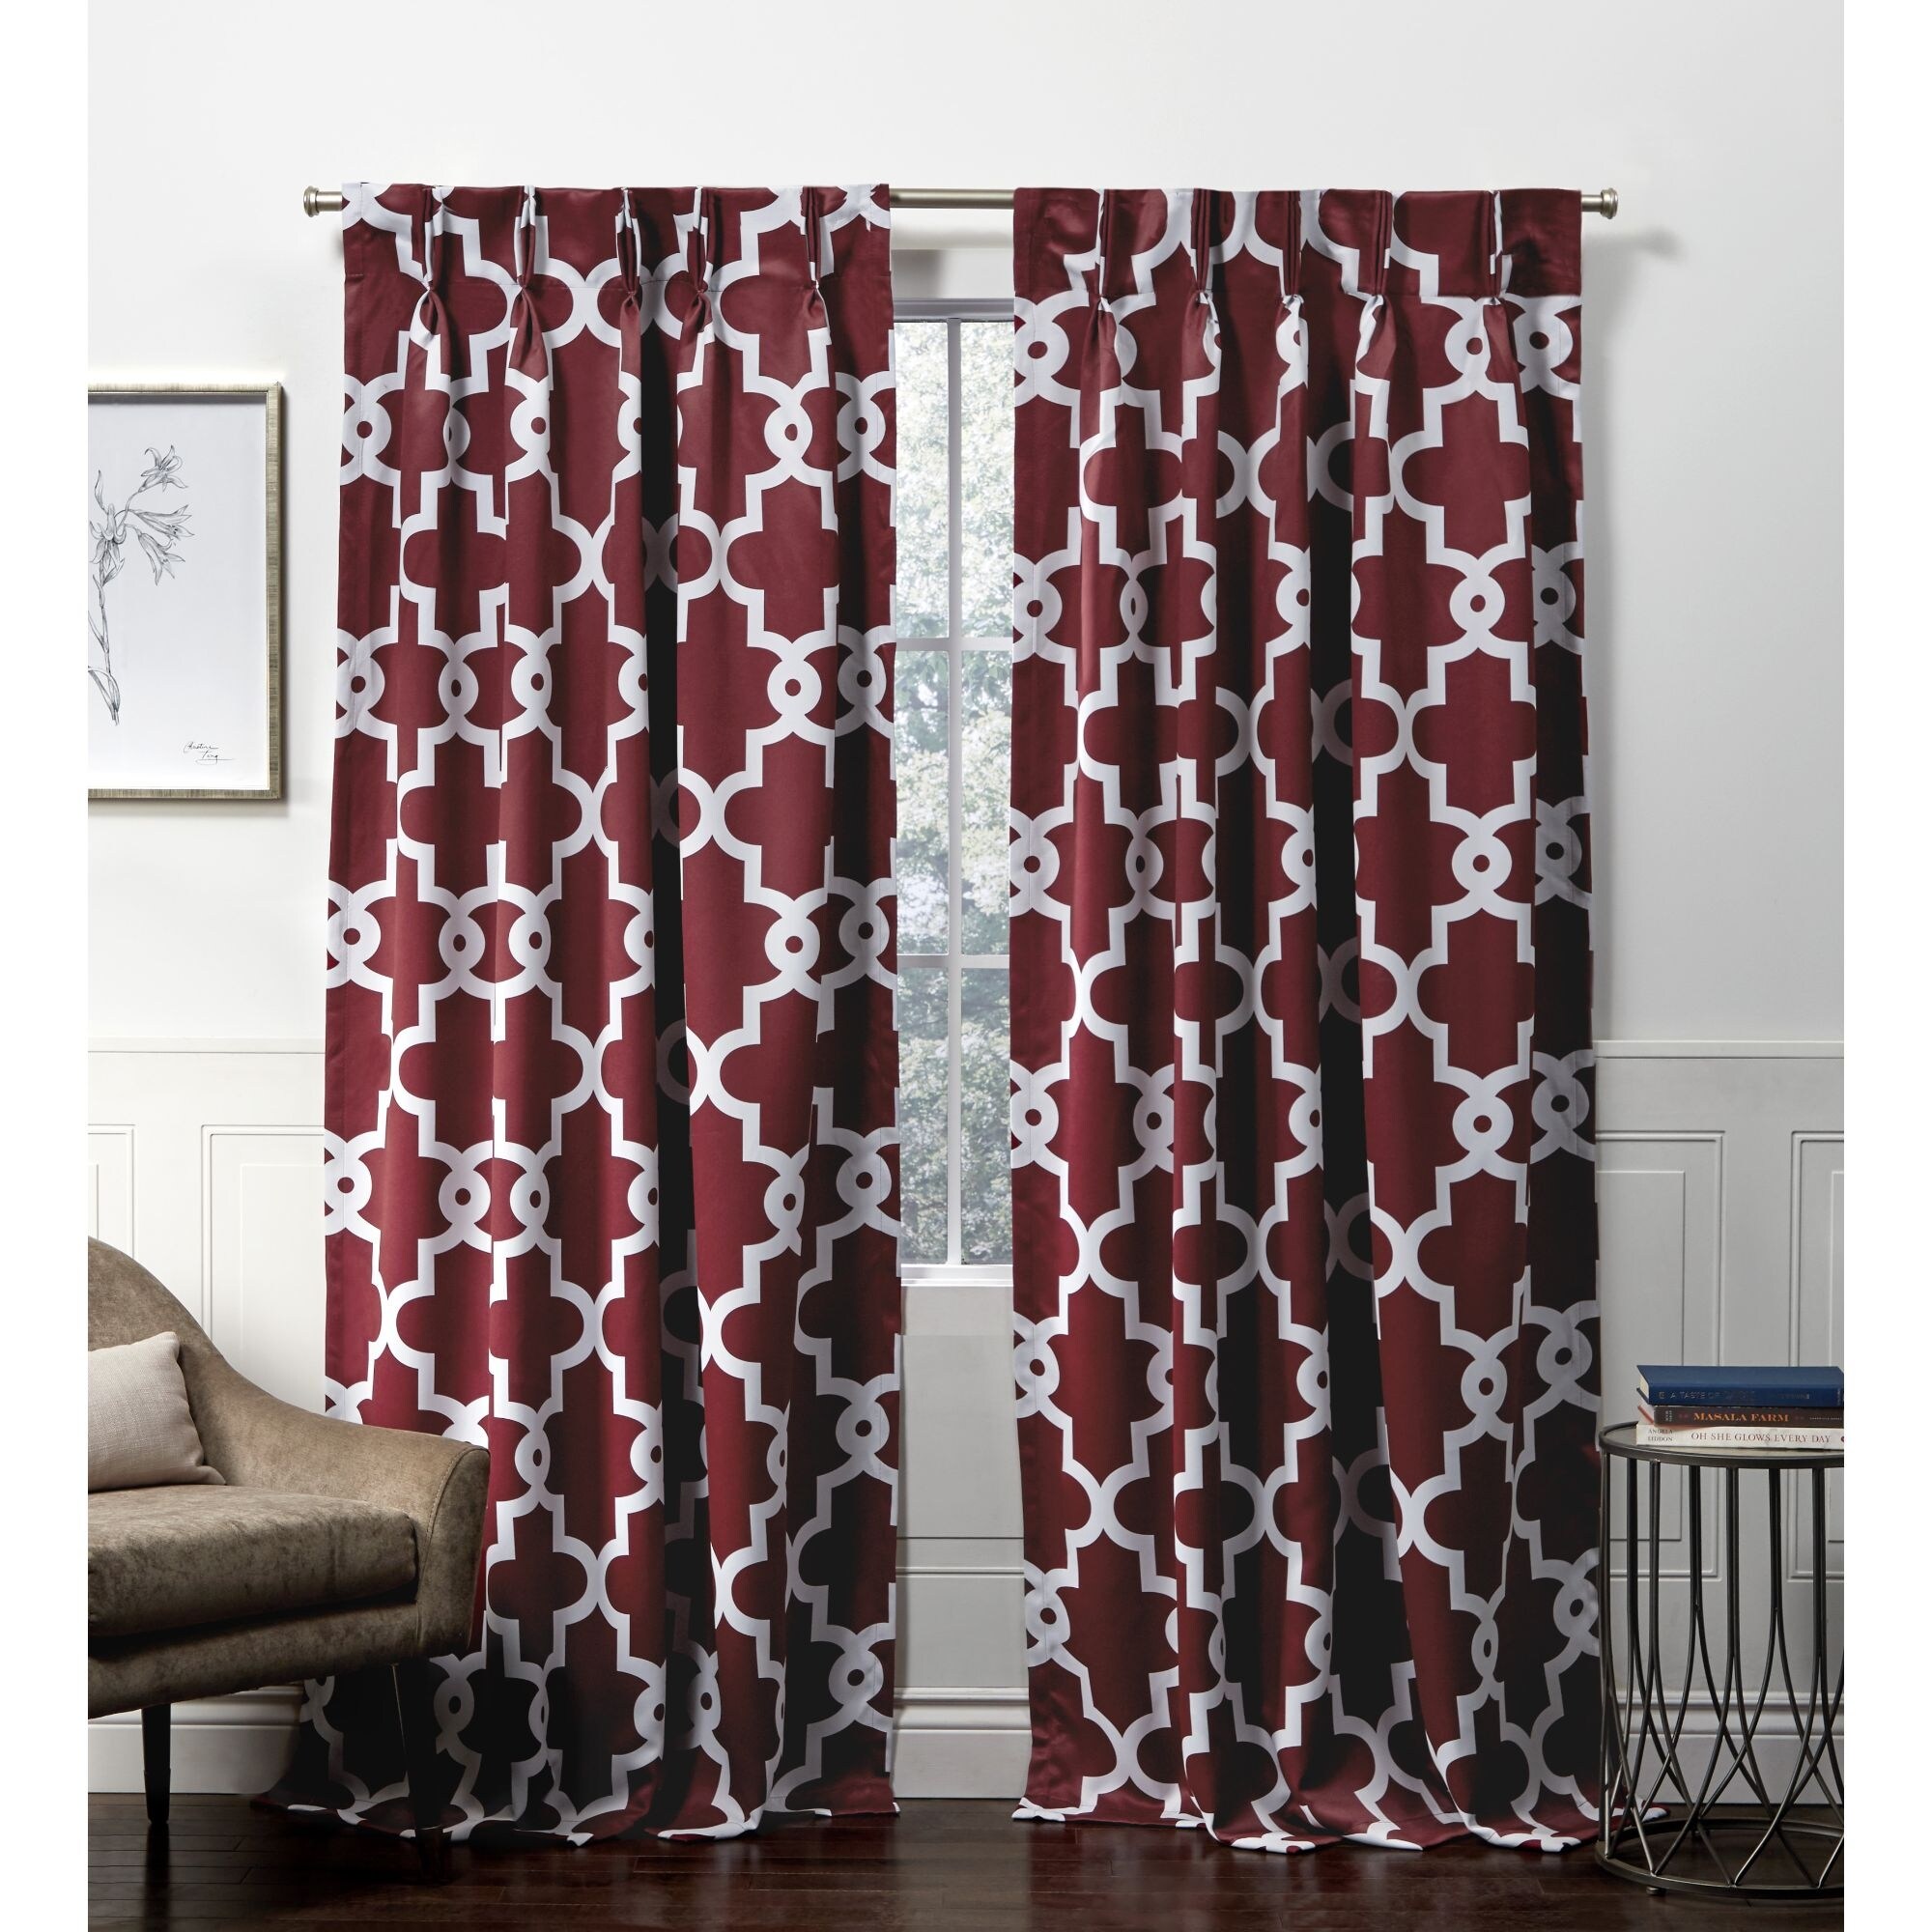 Window Curtain Semi Blackout Home Room Decoration Floral Pattern Yarn Dyed Pleat 